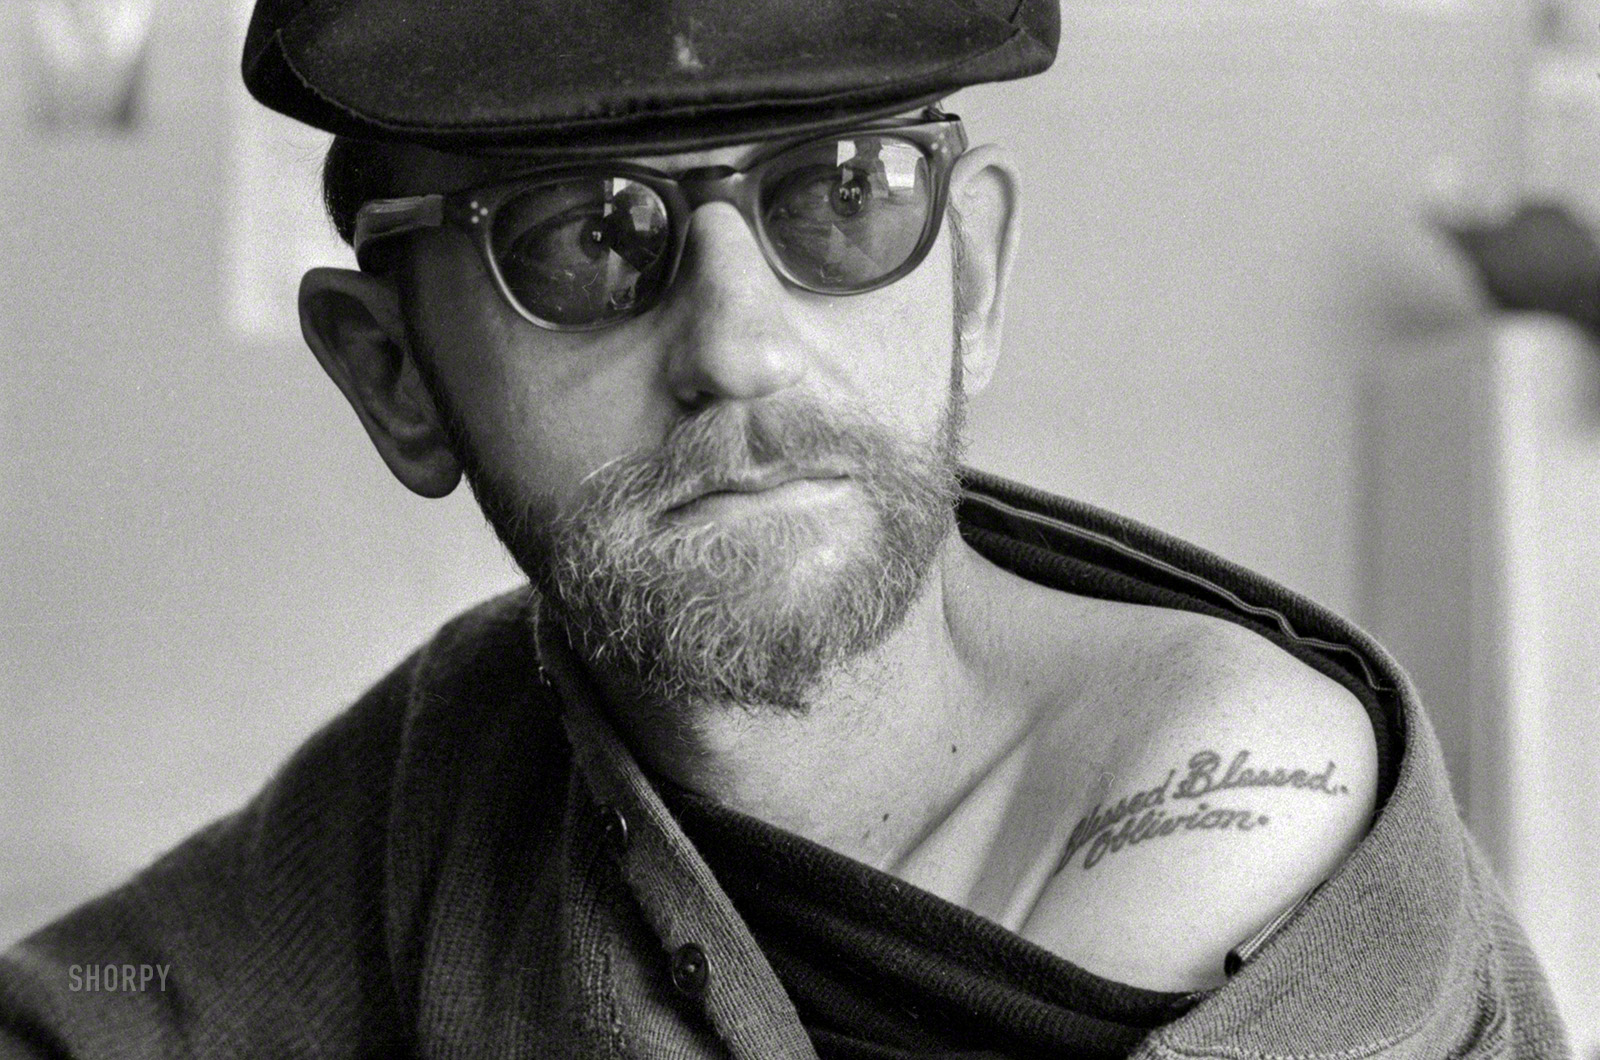 April 1958. "Hubert Leslie, human guinea pig for medical experiments (also an artist known as 'Hube the Cube'), one of the 'Beatnik' community of San Francis&shy;co's North Beach district." 35mm negative from photos by Cal Bernstein for the Look magazine article "The Bored, the Bearded and the Beat." View full size.